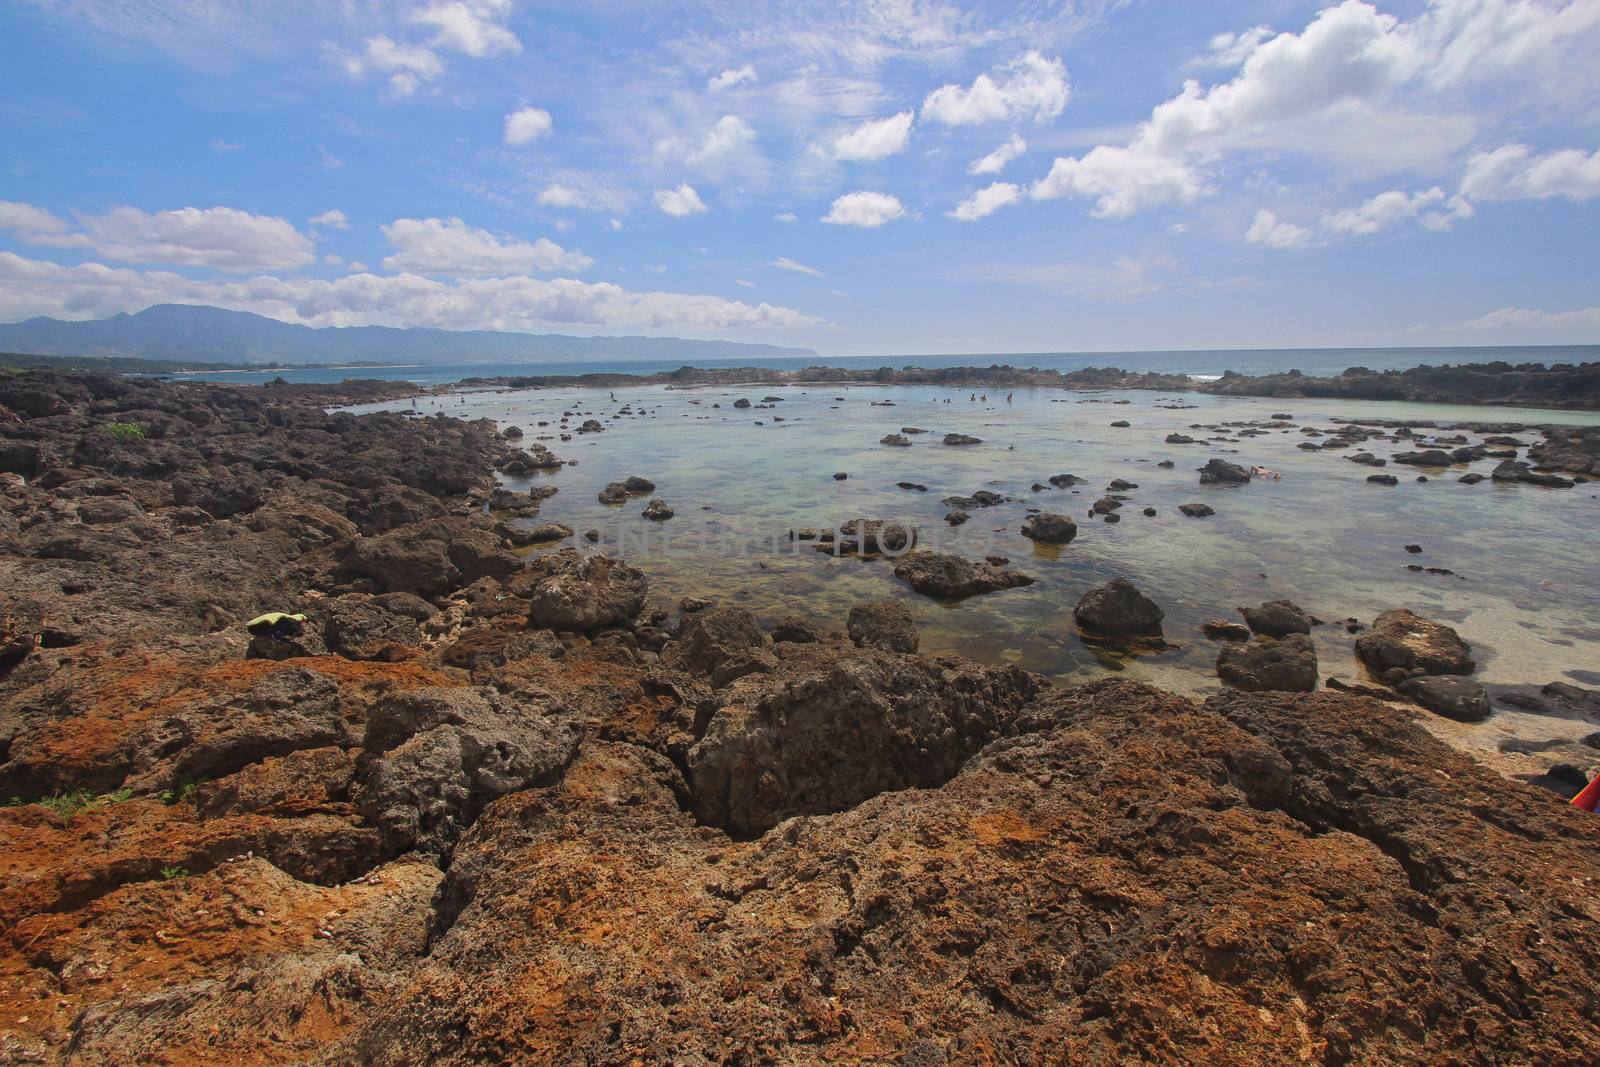 View of the Pupukea tide pools on the south side of Sharks Cove, Oahu, Hawaii. Sharks Cove is located on the north shore of Oahu and has been rated by Scuba Diving Magazine as one of the top 12 shore diving areas in the world.